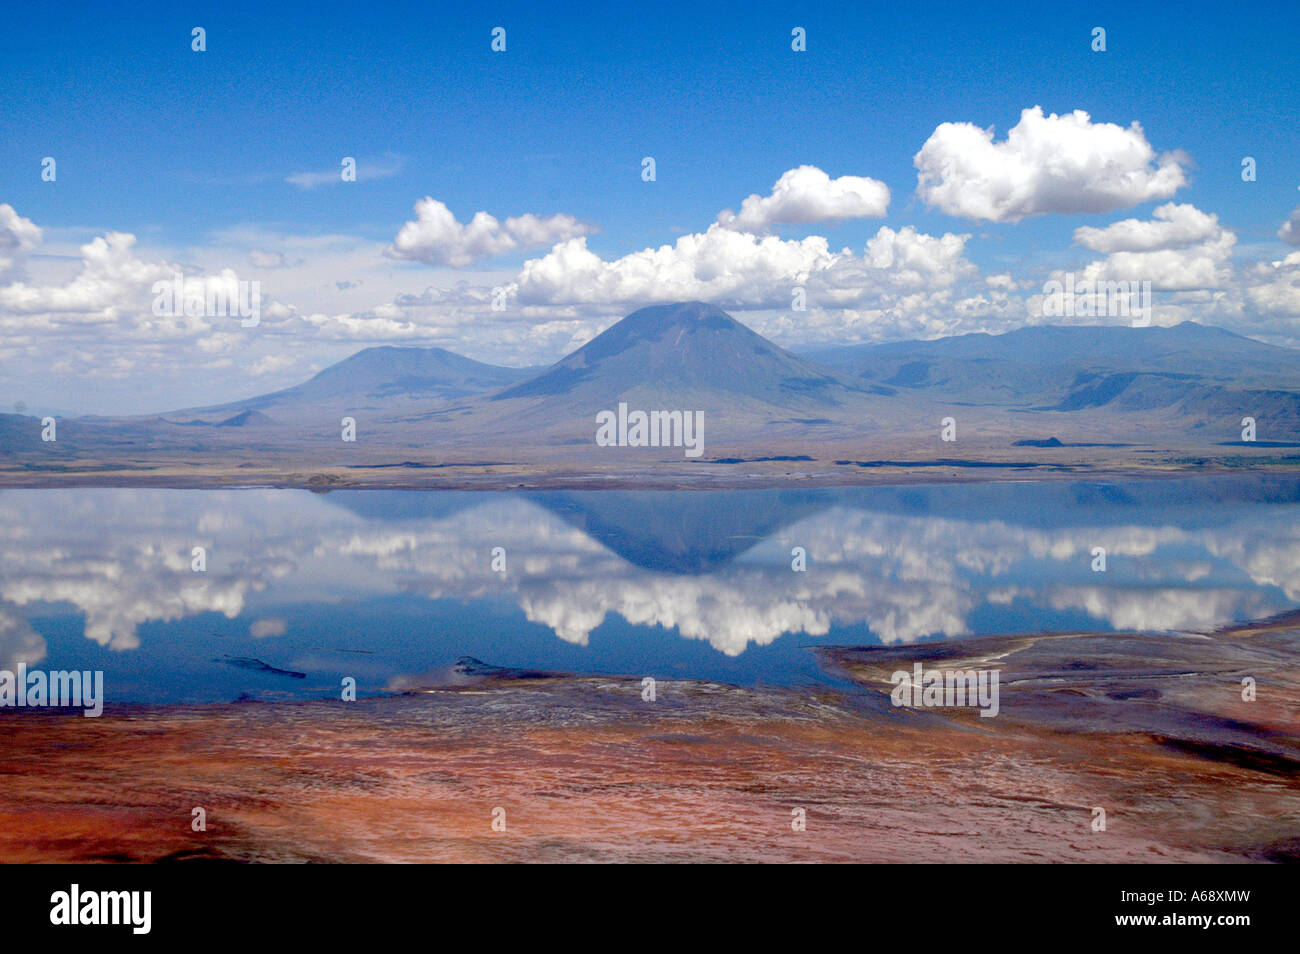 Aerial view of Lake Natron and the volcano Ol Doinyo Lengai, Tanzania. The red pigment in the Cyanobacteria produce a red color. Stock Photo